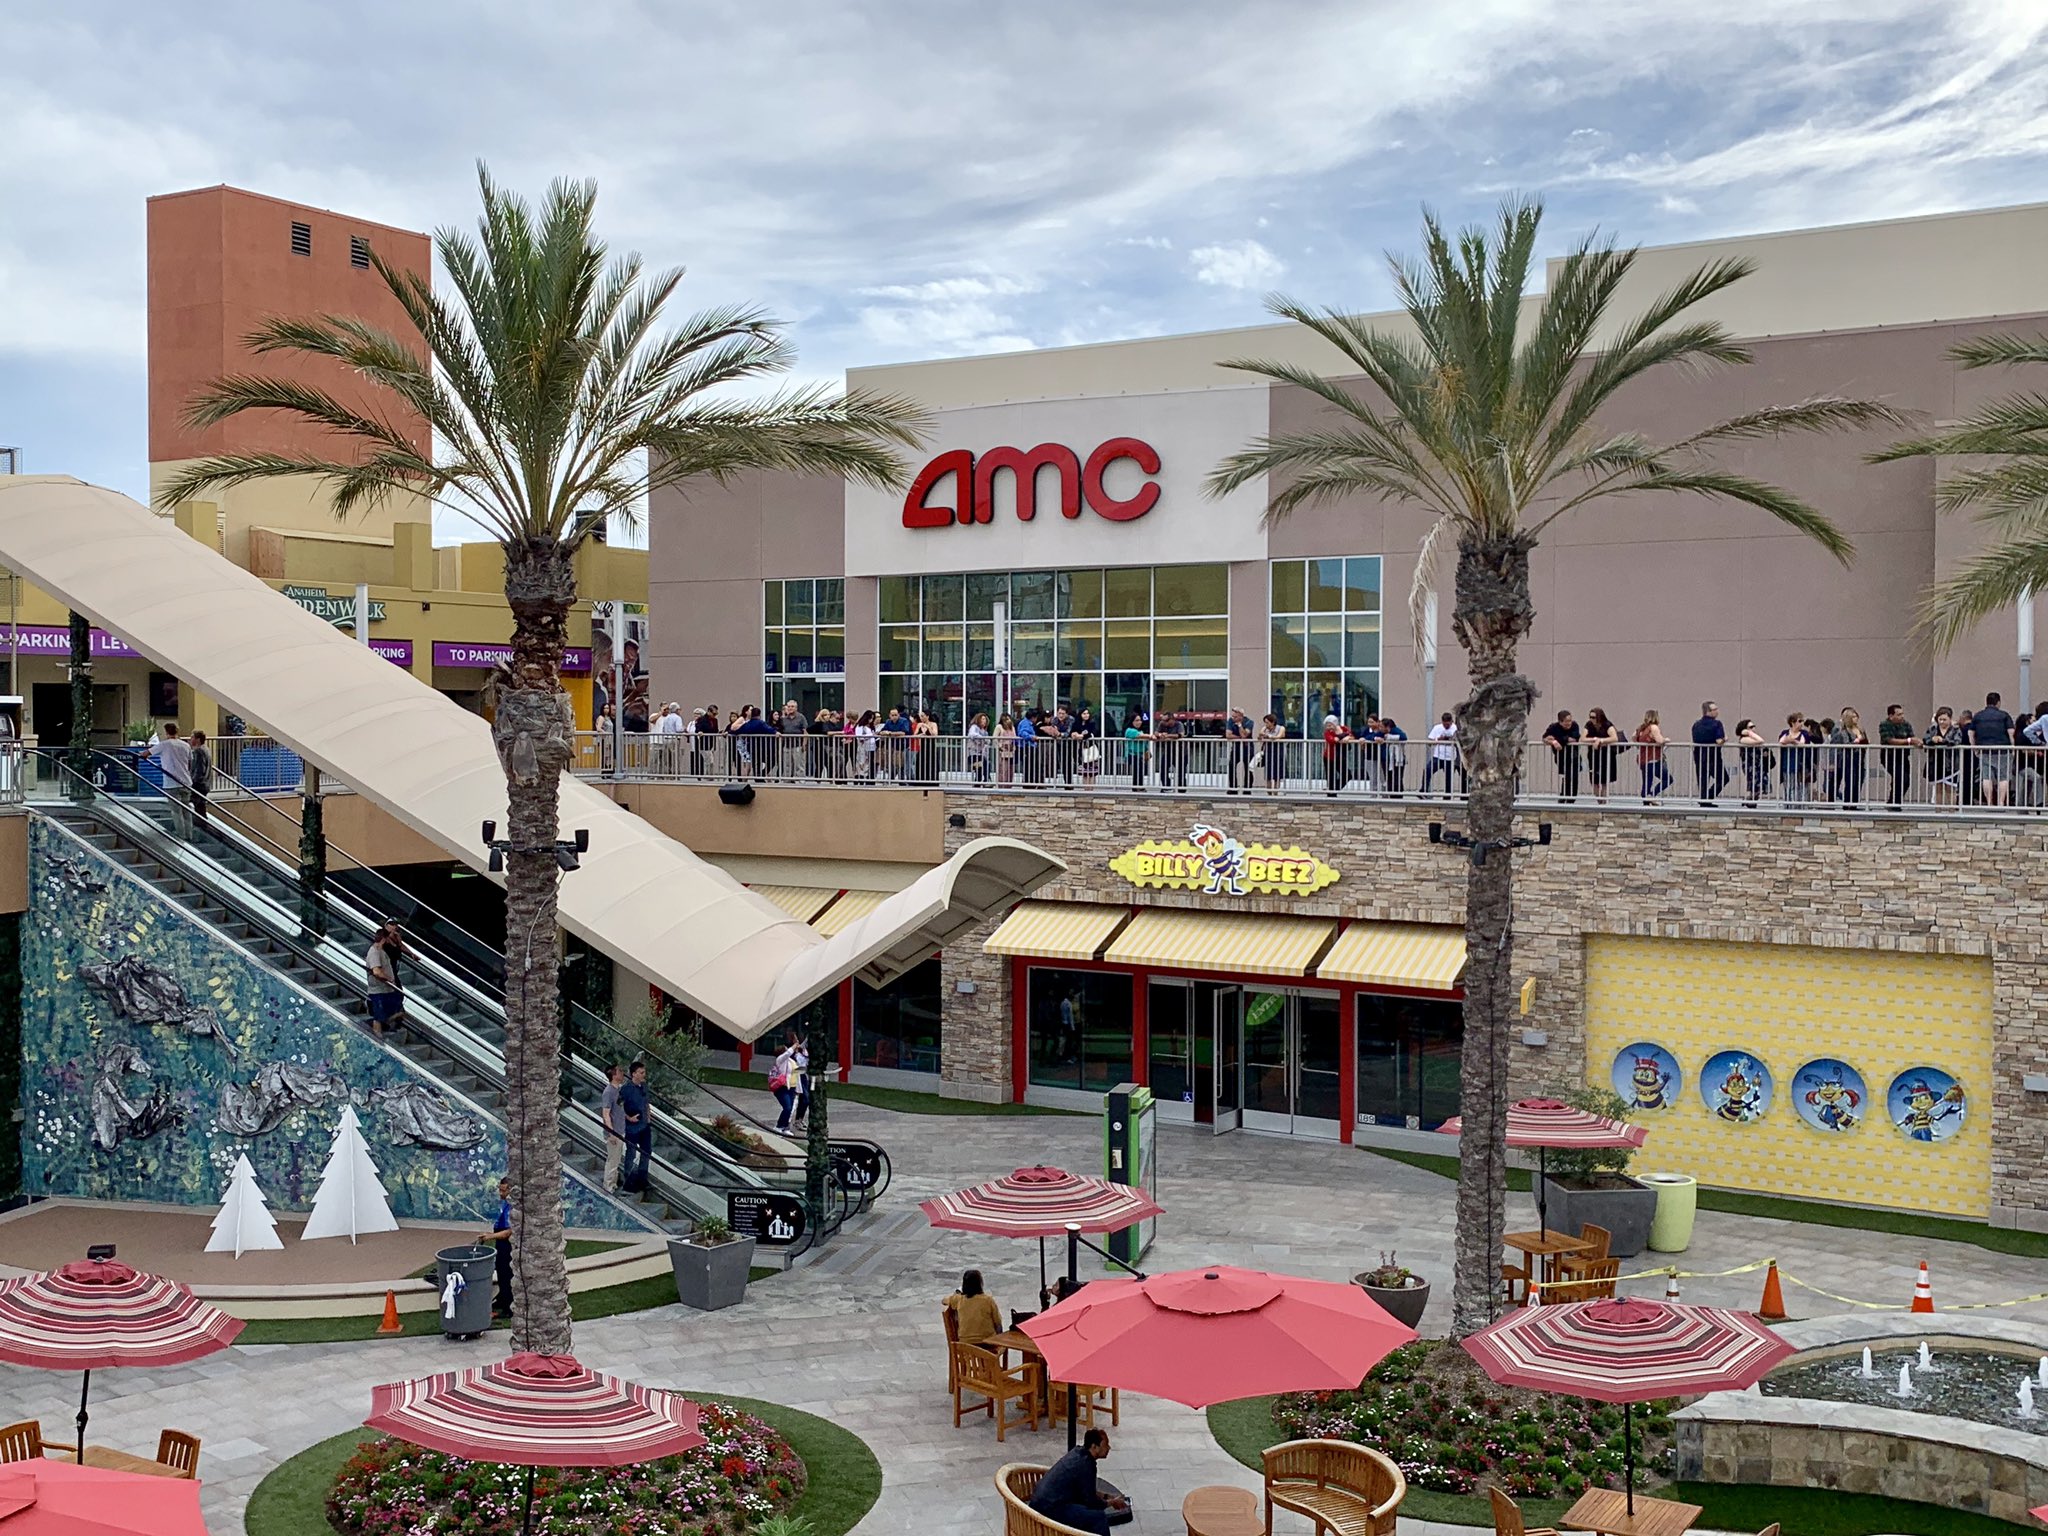 Attractions 360° on X: The New AMC (6) located next door to House